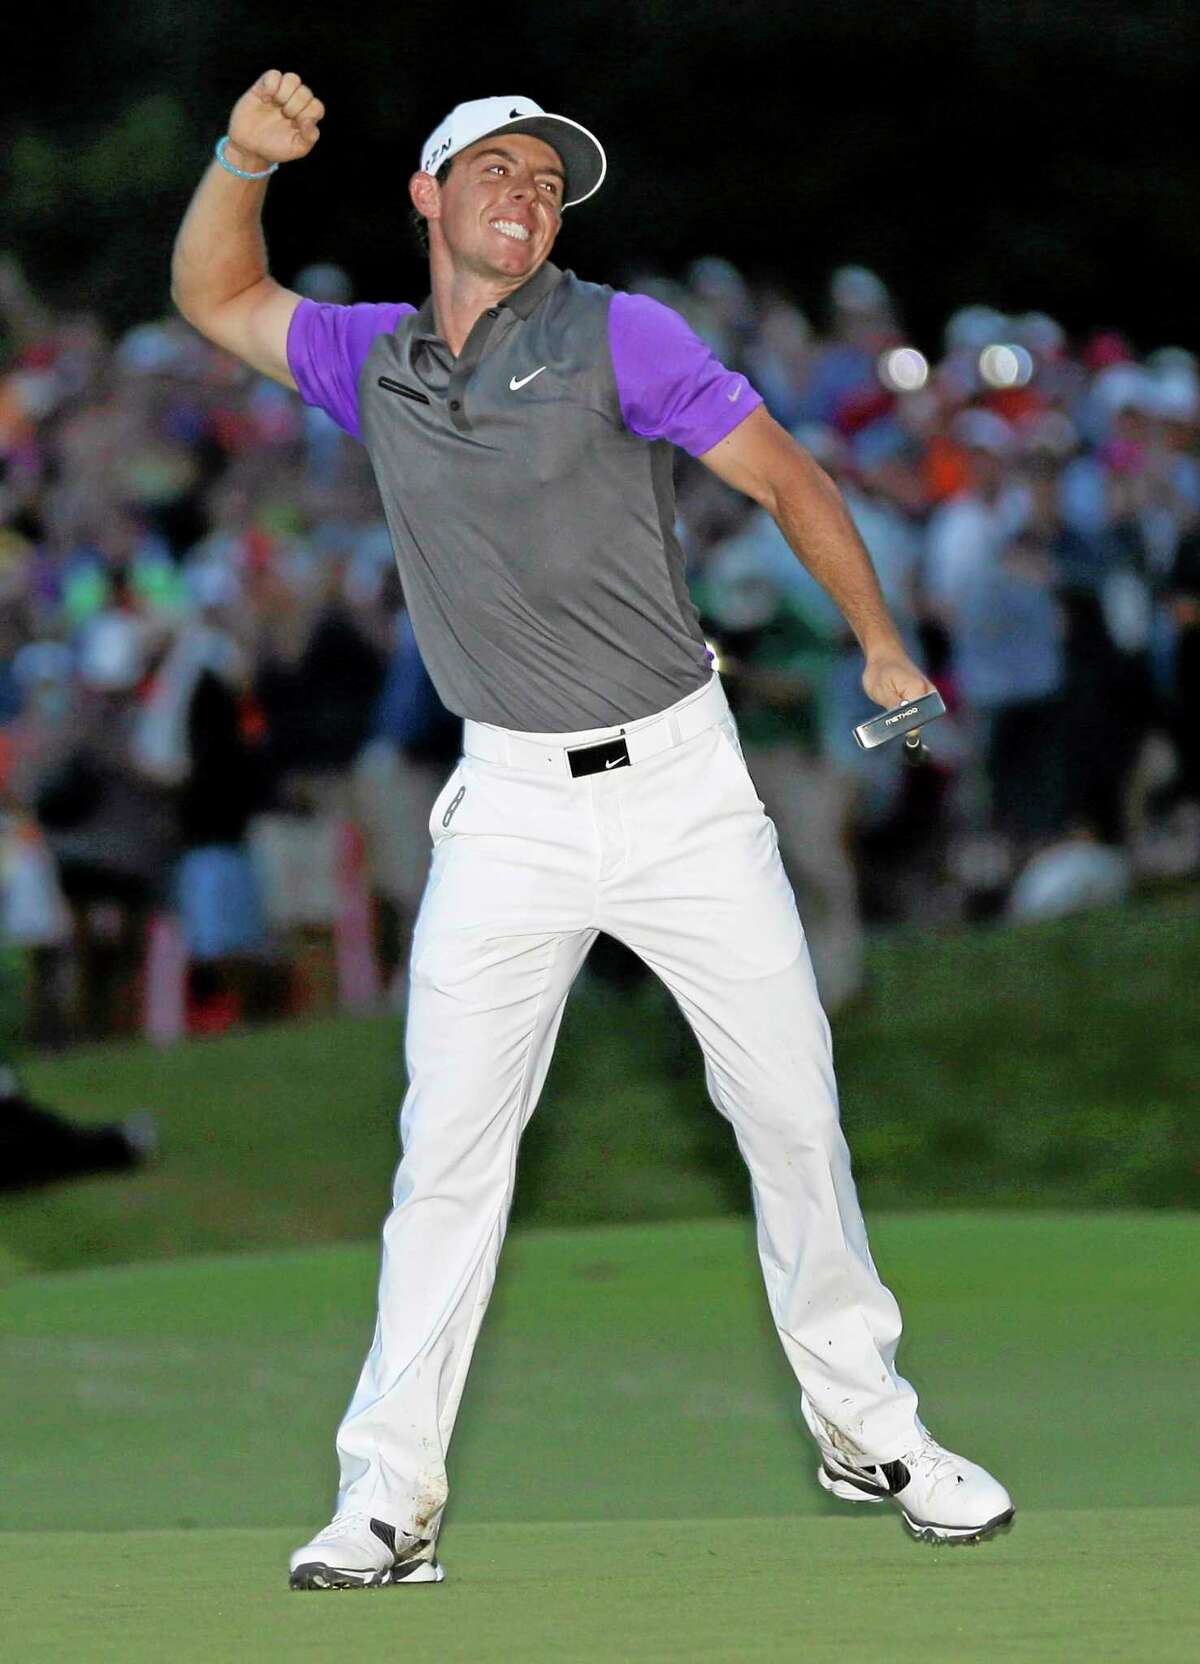 Rory McIlroy celebrates after winning the PGA Championship at Valhalla Golf Club on Sunday in Louisville, Ky.